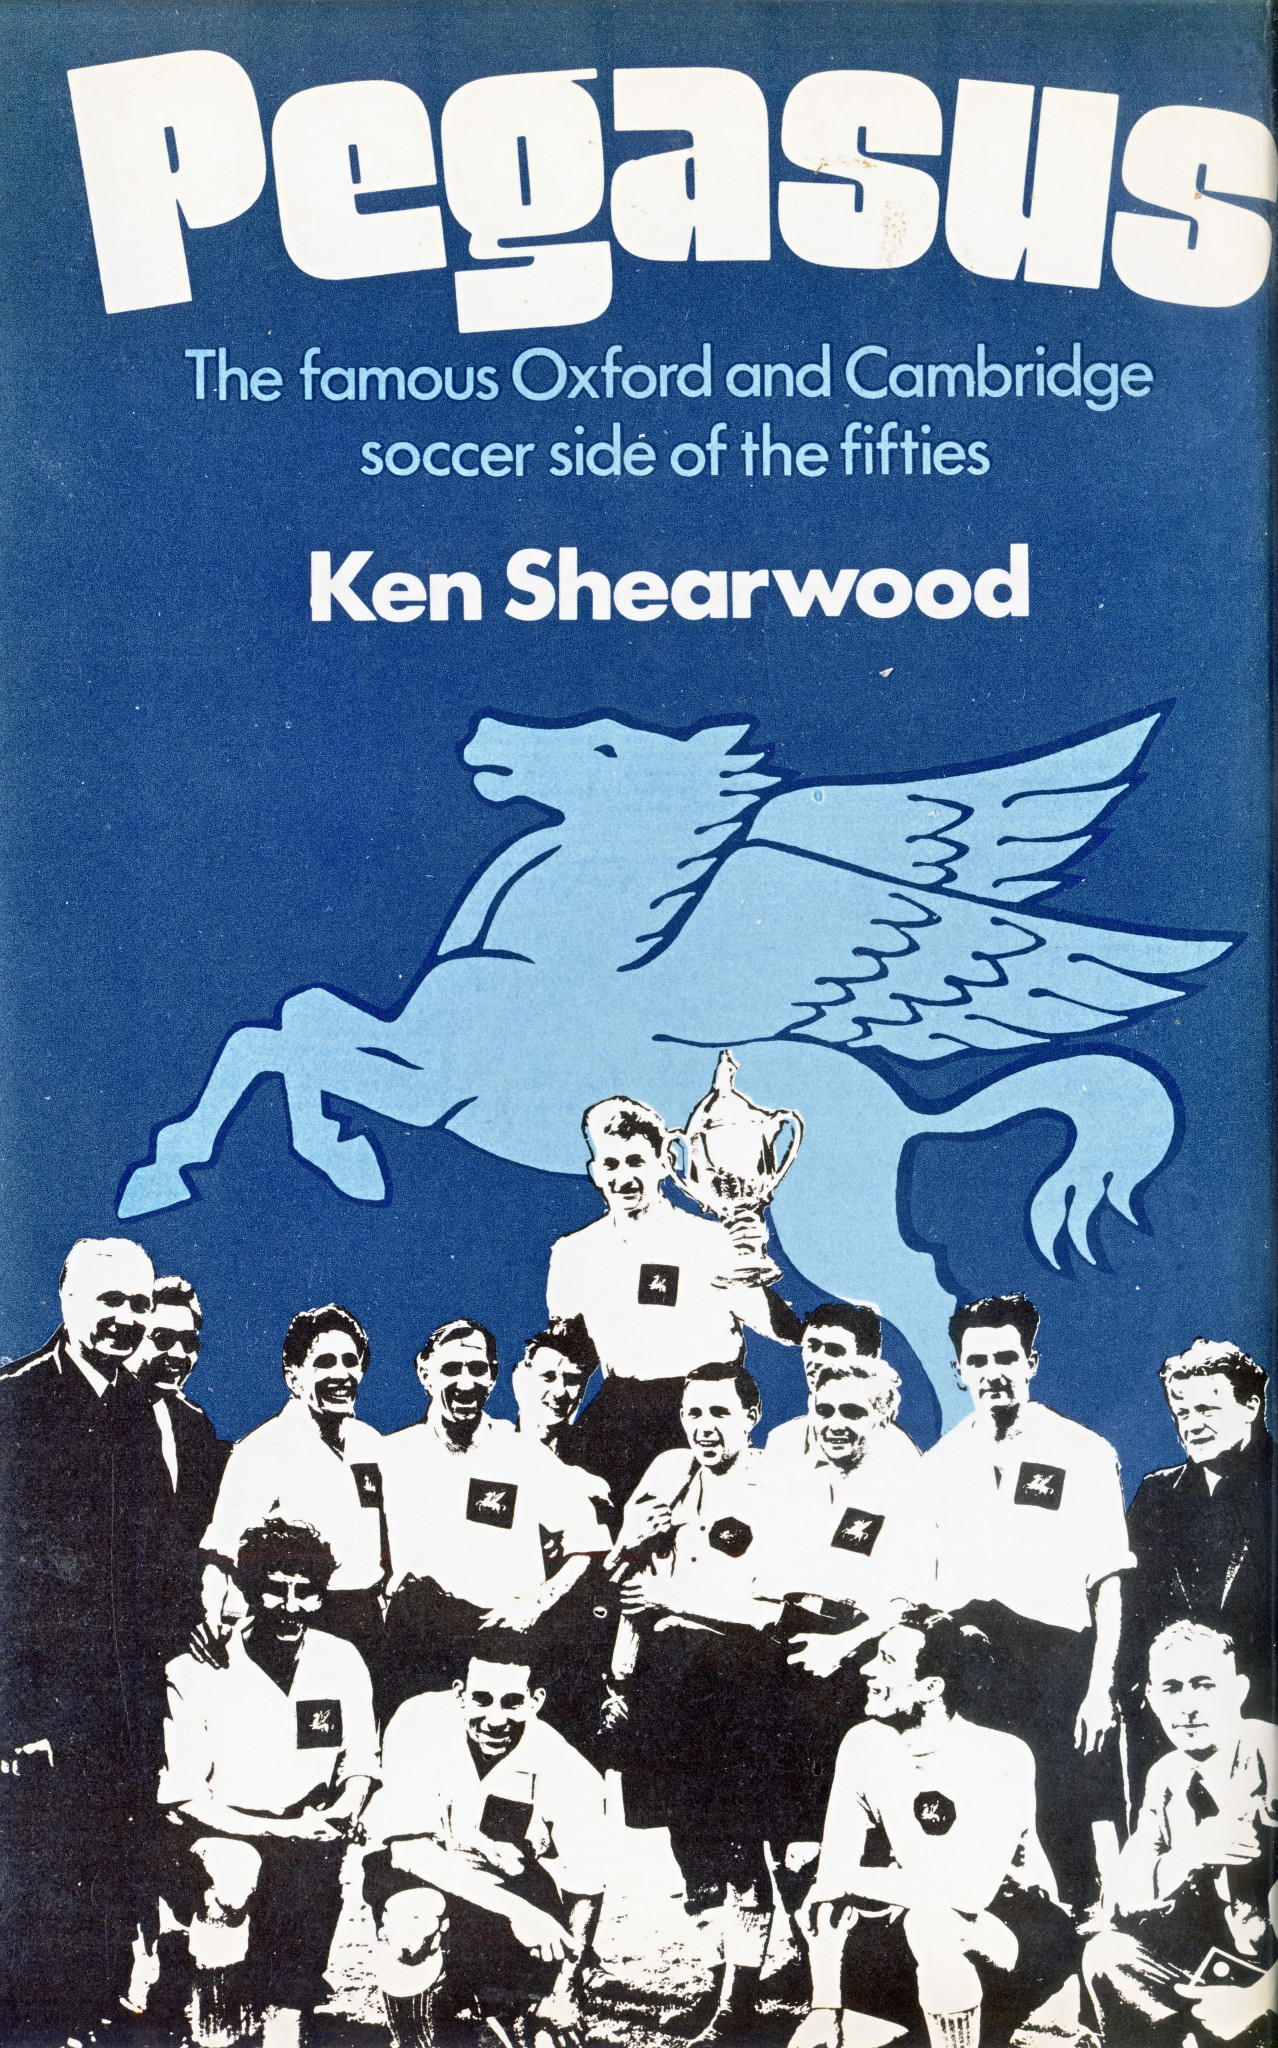 The winged horse emblem of Pegasus was depicted on a history of the club written by centre half Ken Shearwood ©Oxford Illustrated Press